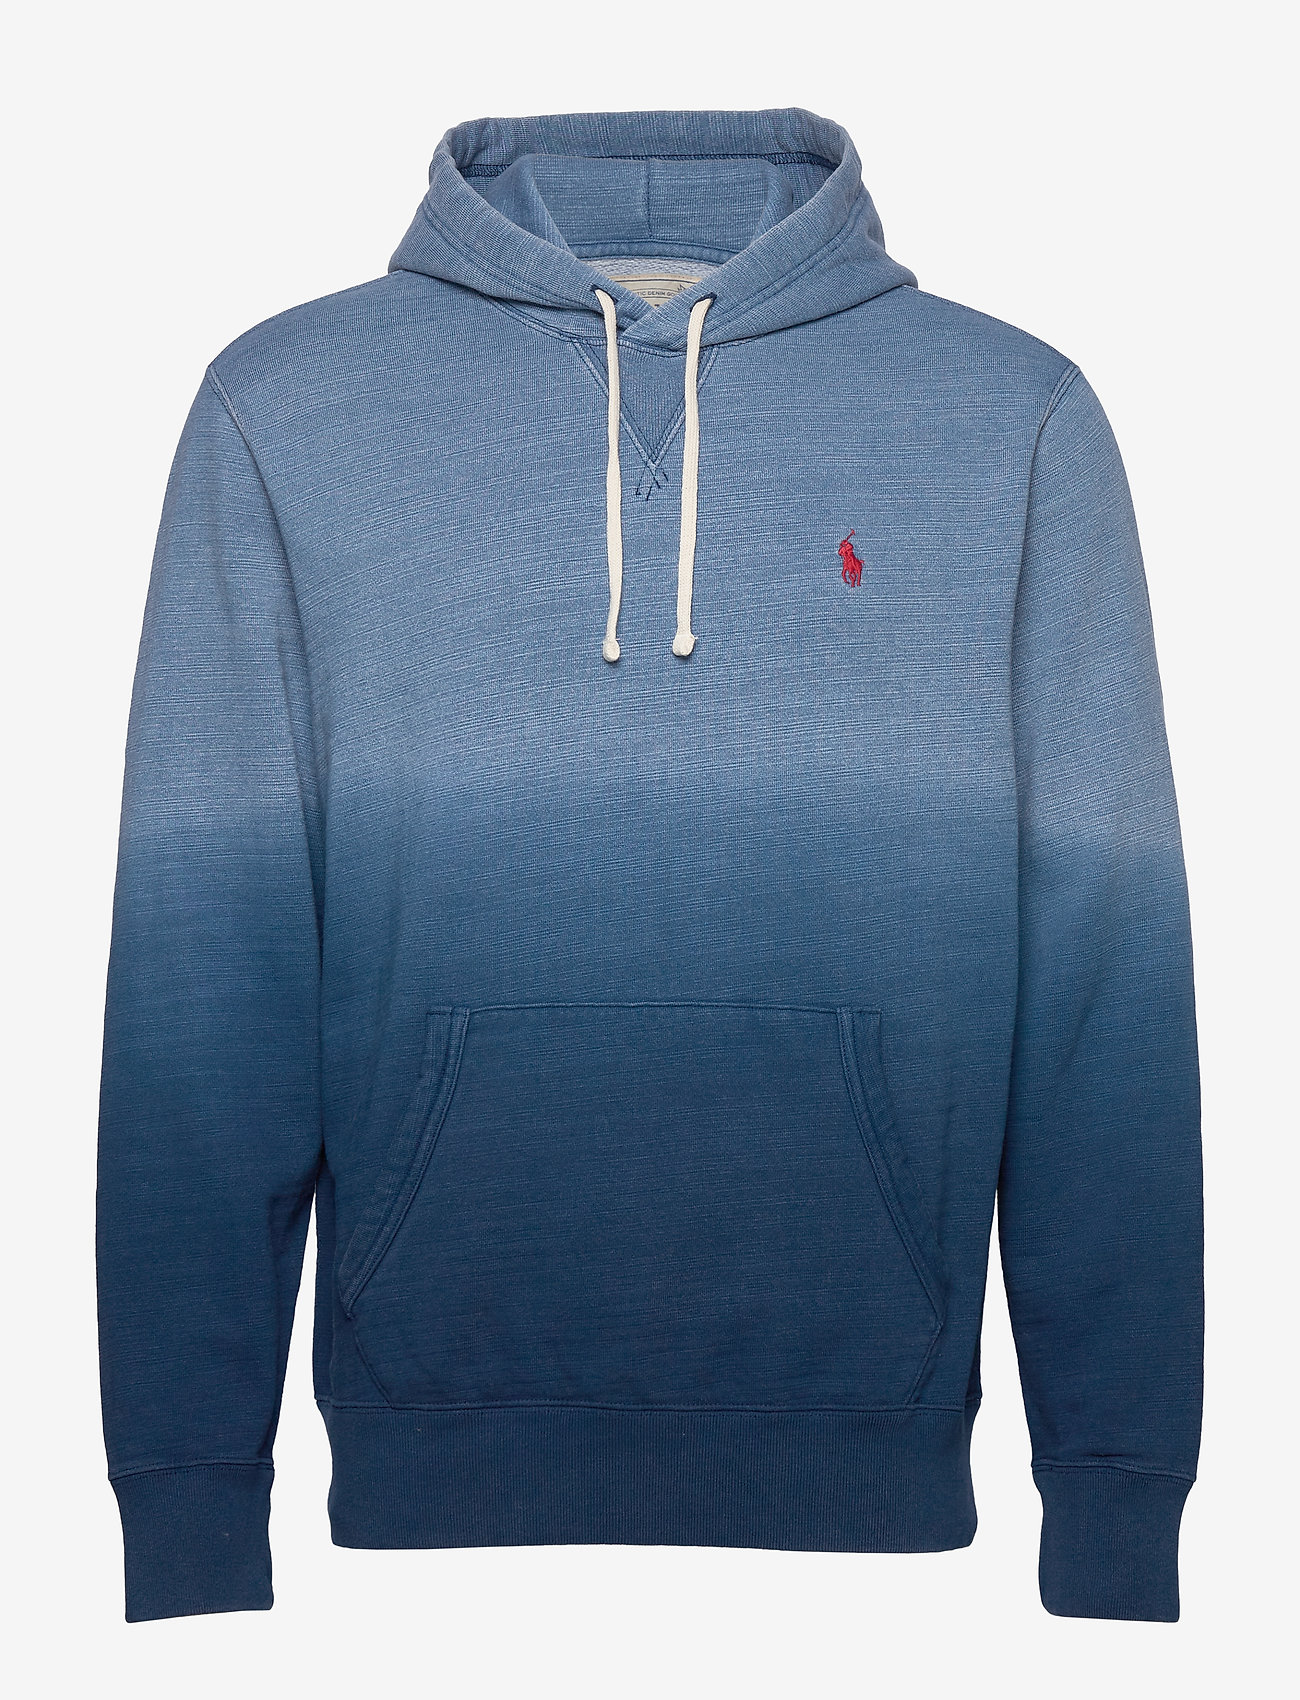 polo ralph lauren french terry hoodie